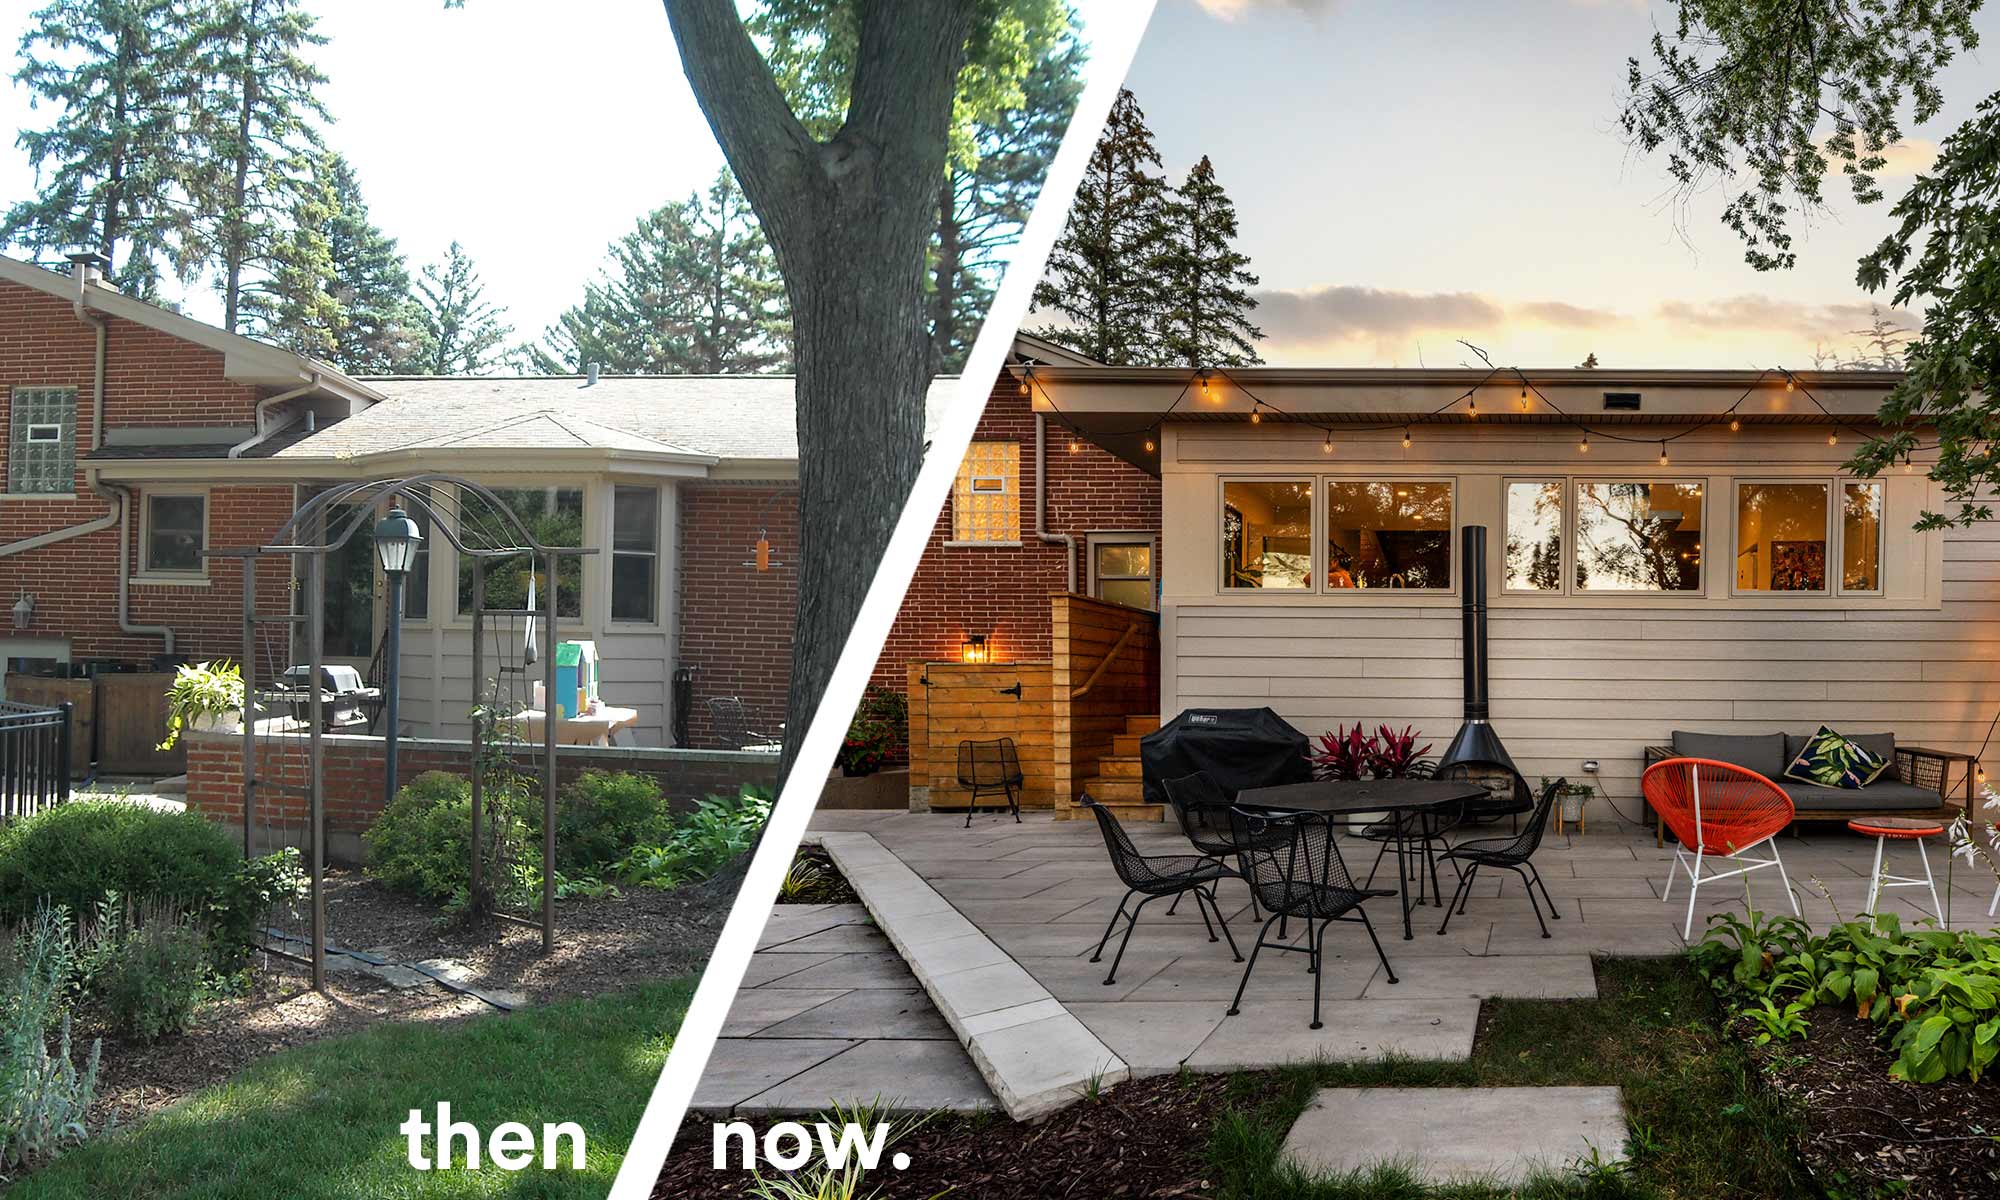 Before and After exterior view of a mid century modern kitchen addition